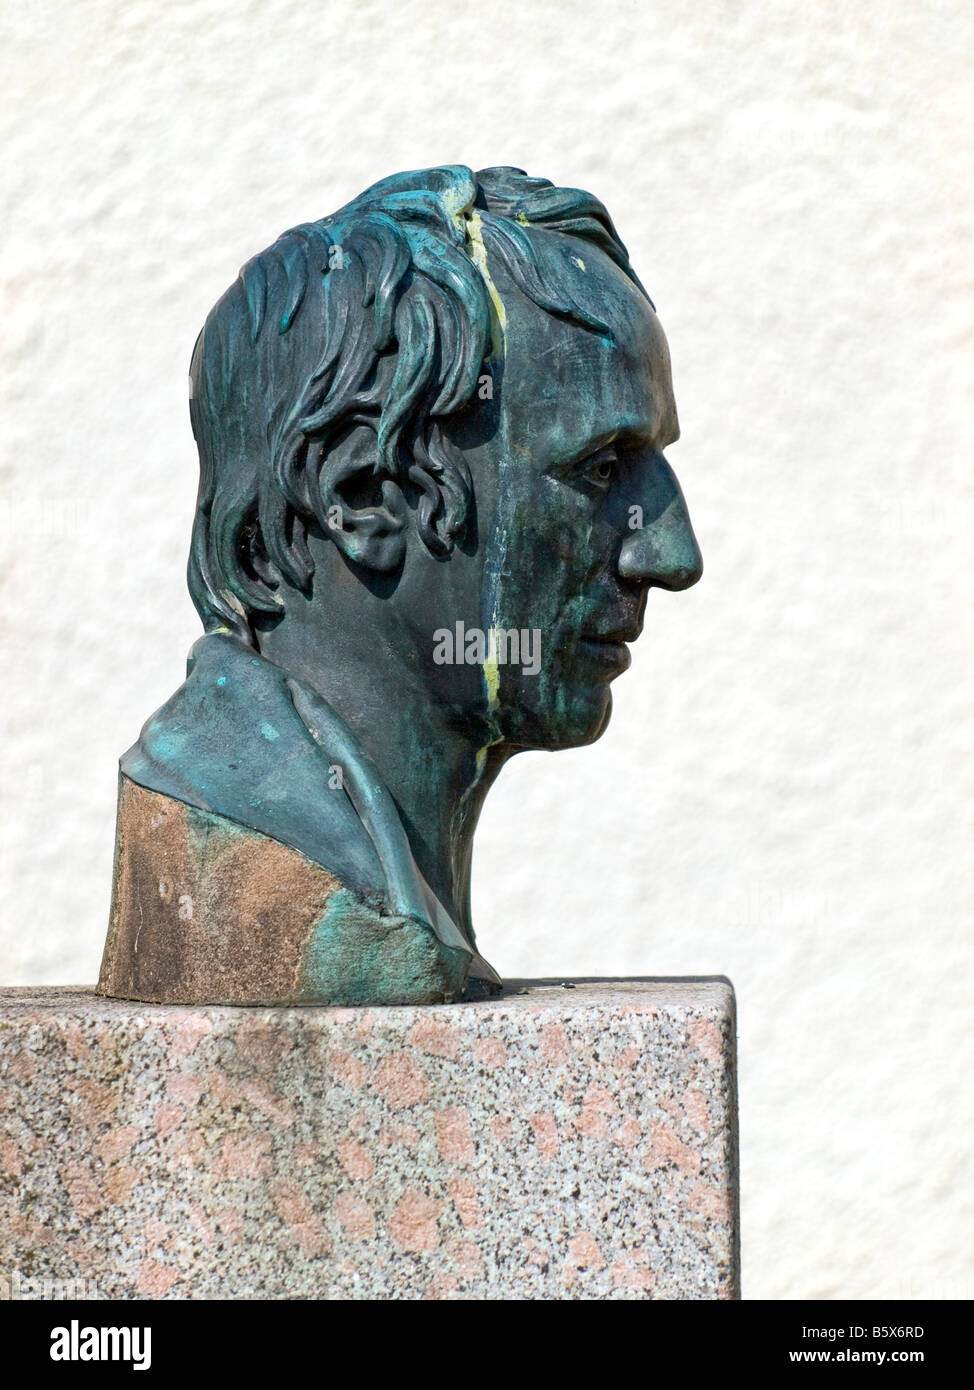 The bust of William Wordsworth 1770 - 1850, Cockermouth, Cumbria Stock Photo